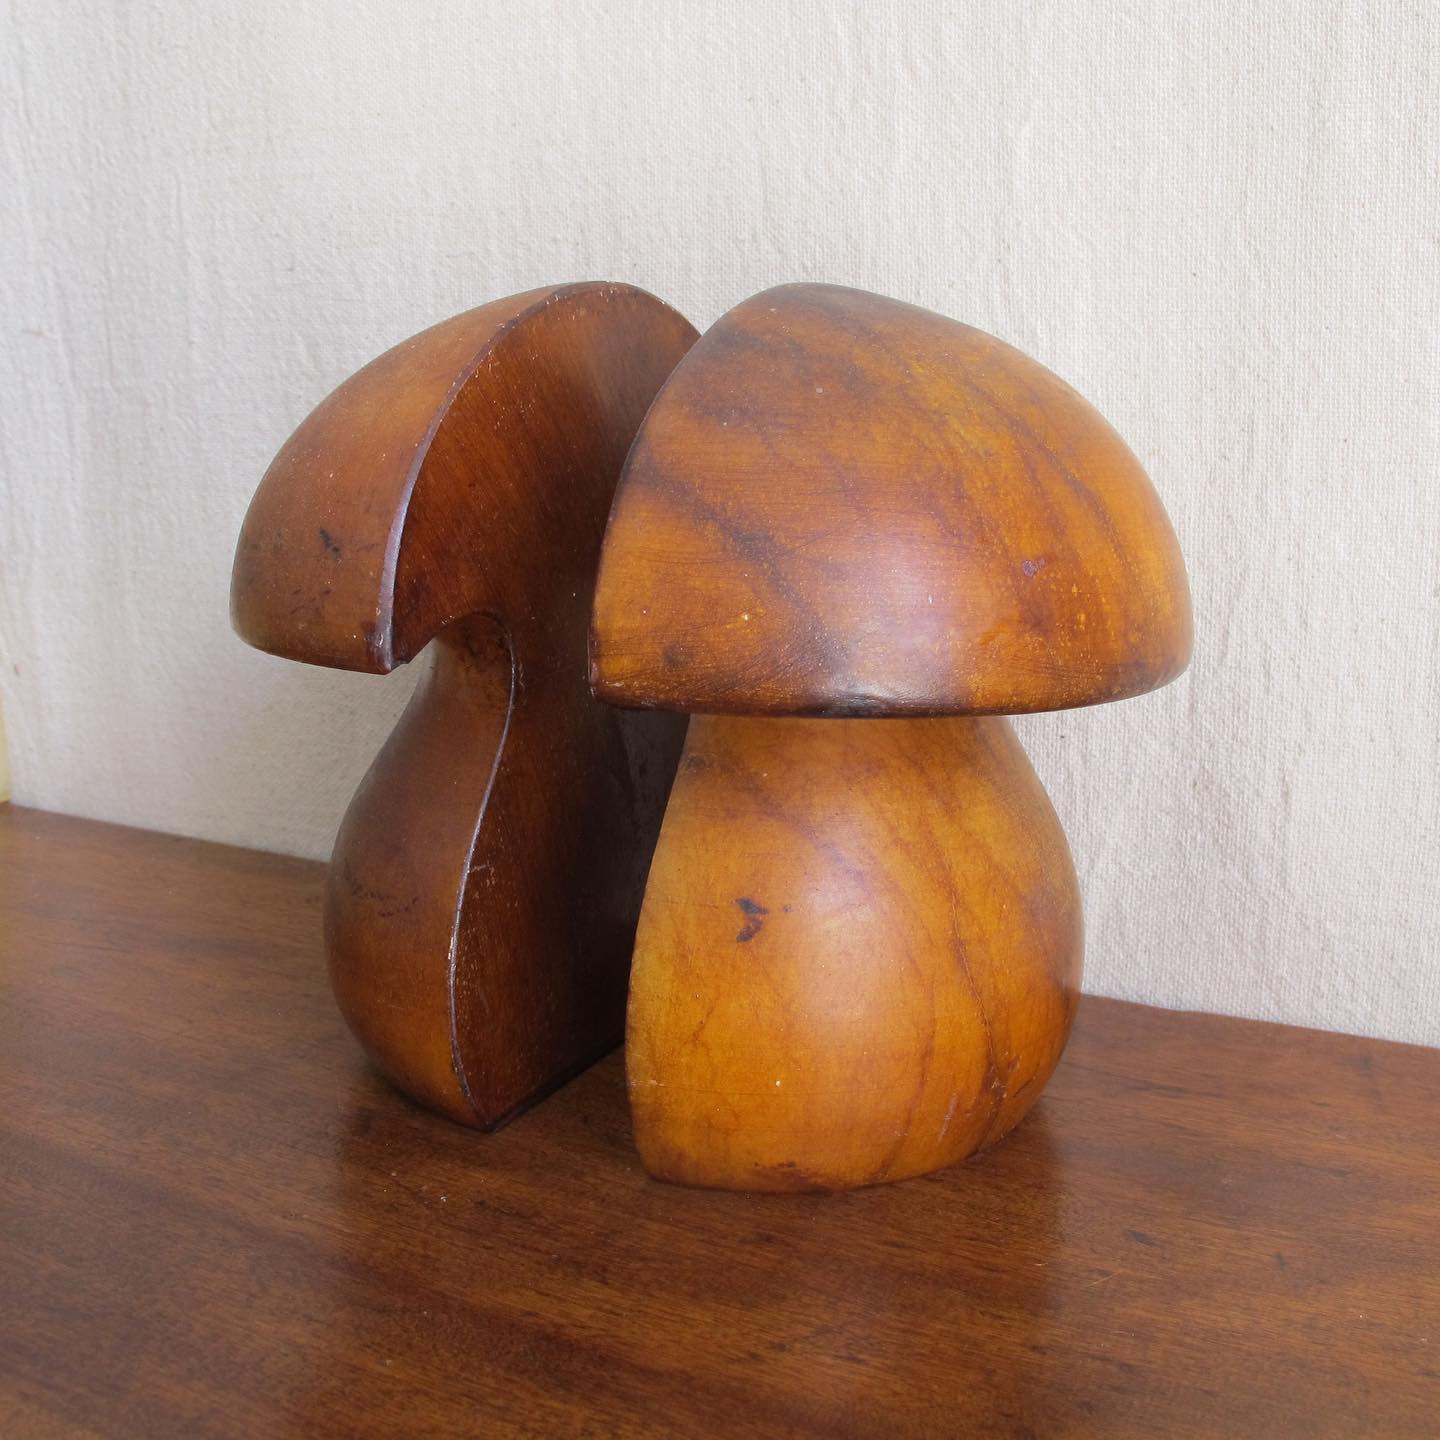 Large mushroom or toadstool form Italian alabaster bookends, c. 1950s 1960s